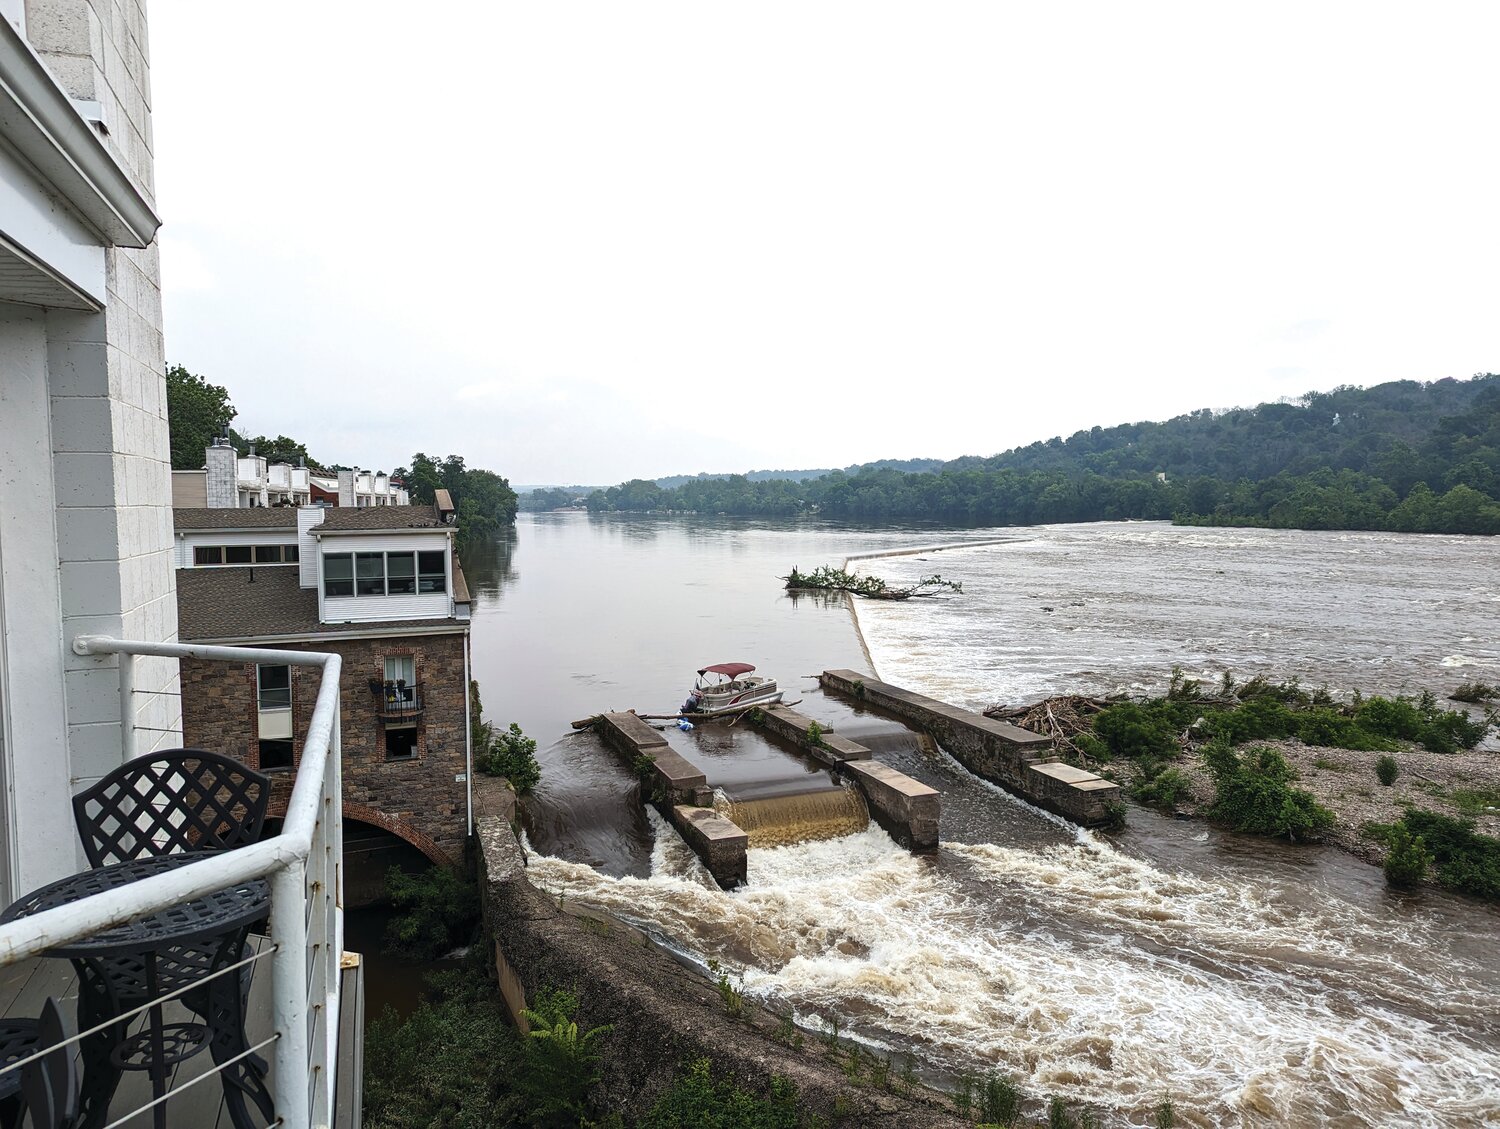 A pontoon boat set adrift by the weekend’s storm and flood sits idle on at the New Hope Wing Dam on the Delaware River in front of the Waterworks Condominiums.